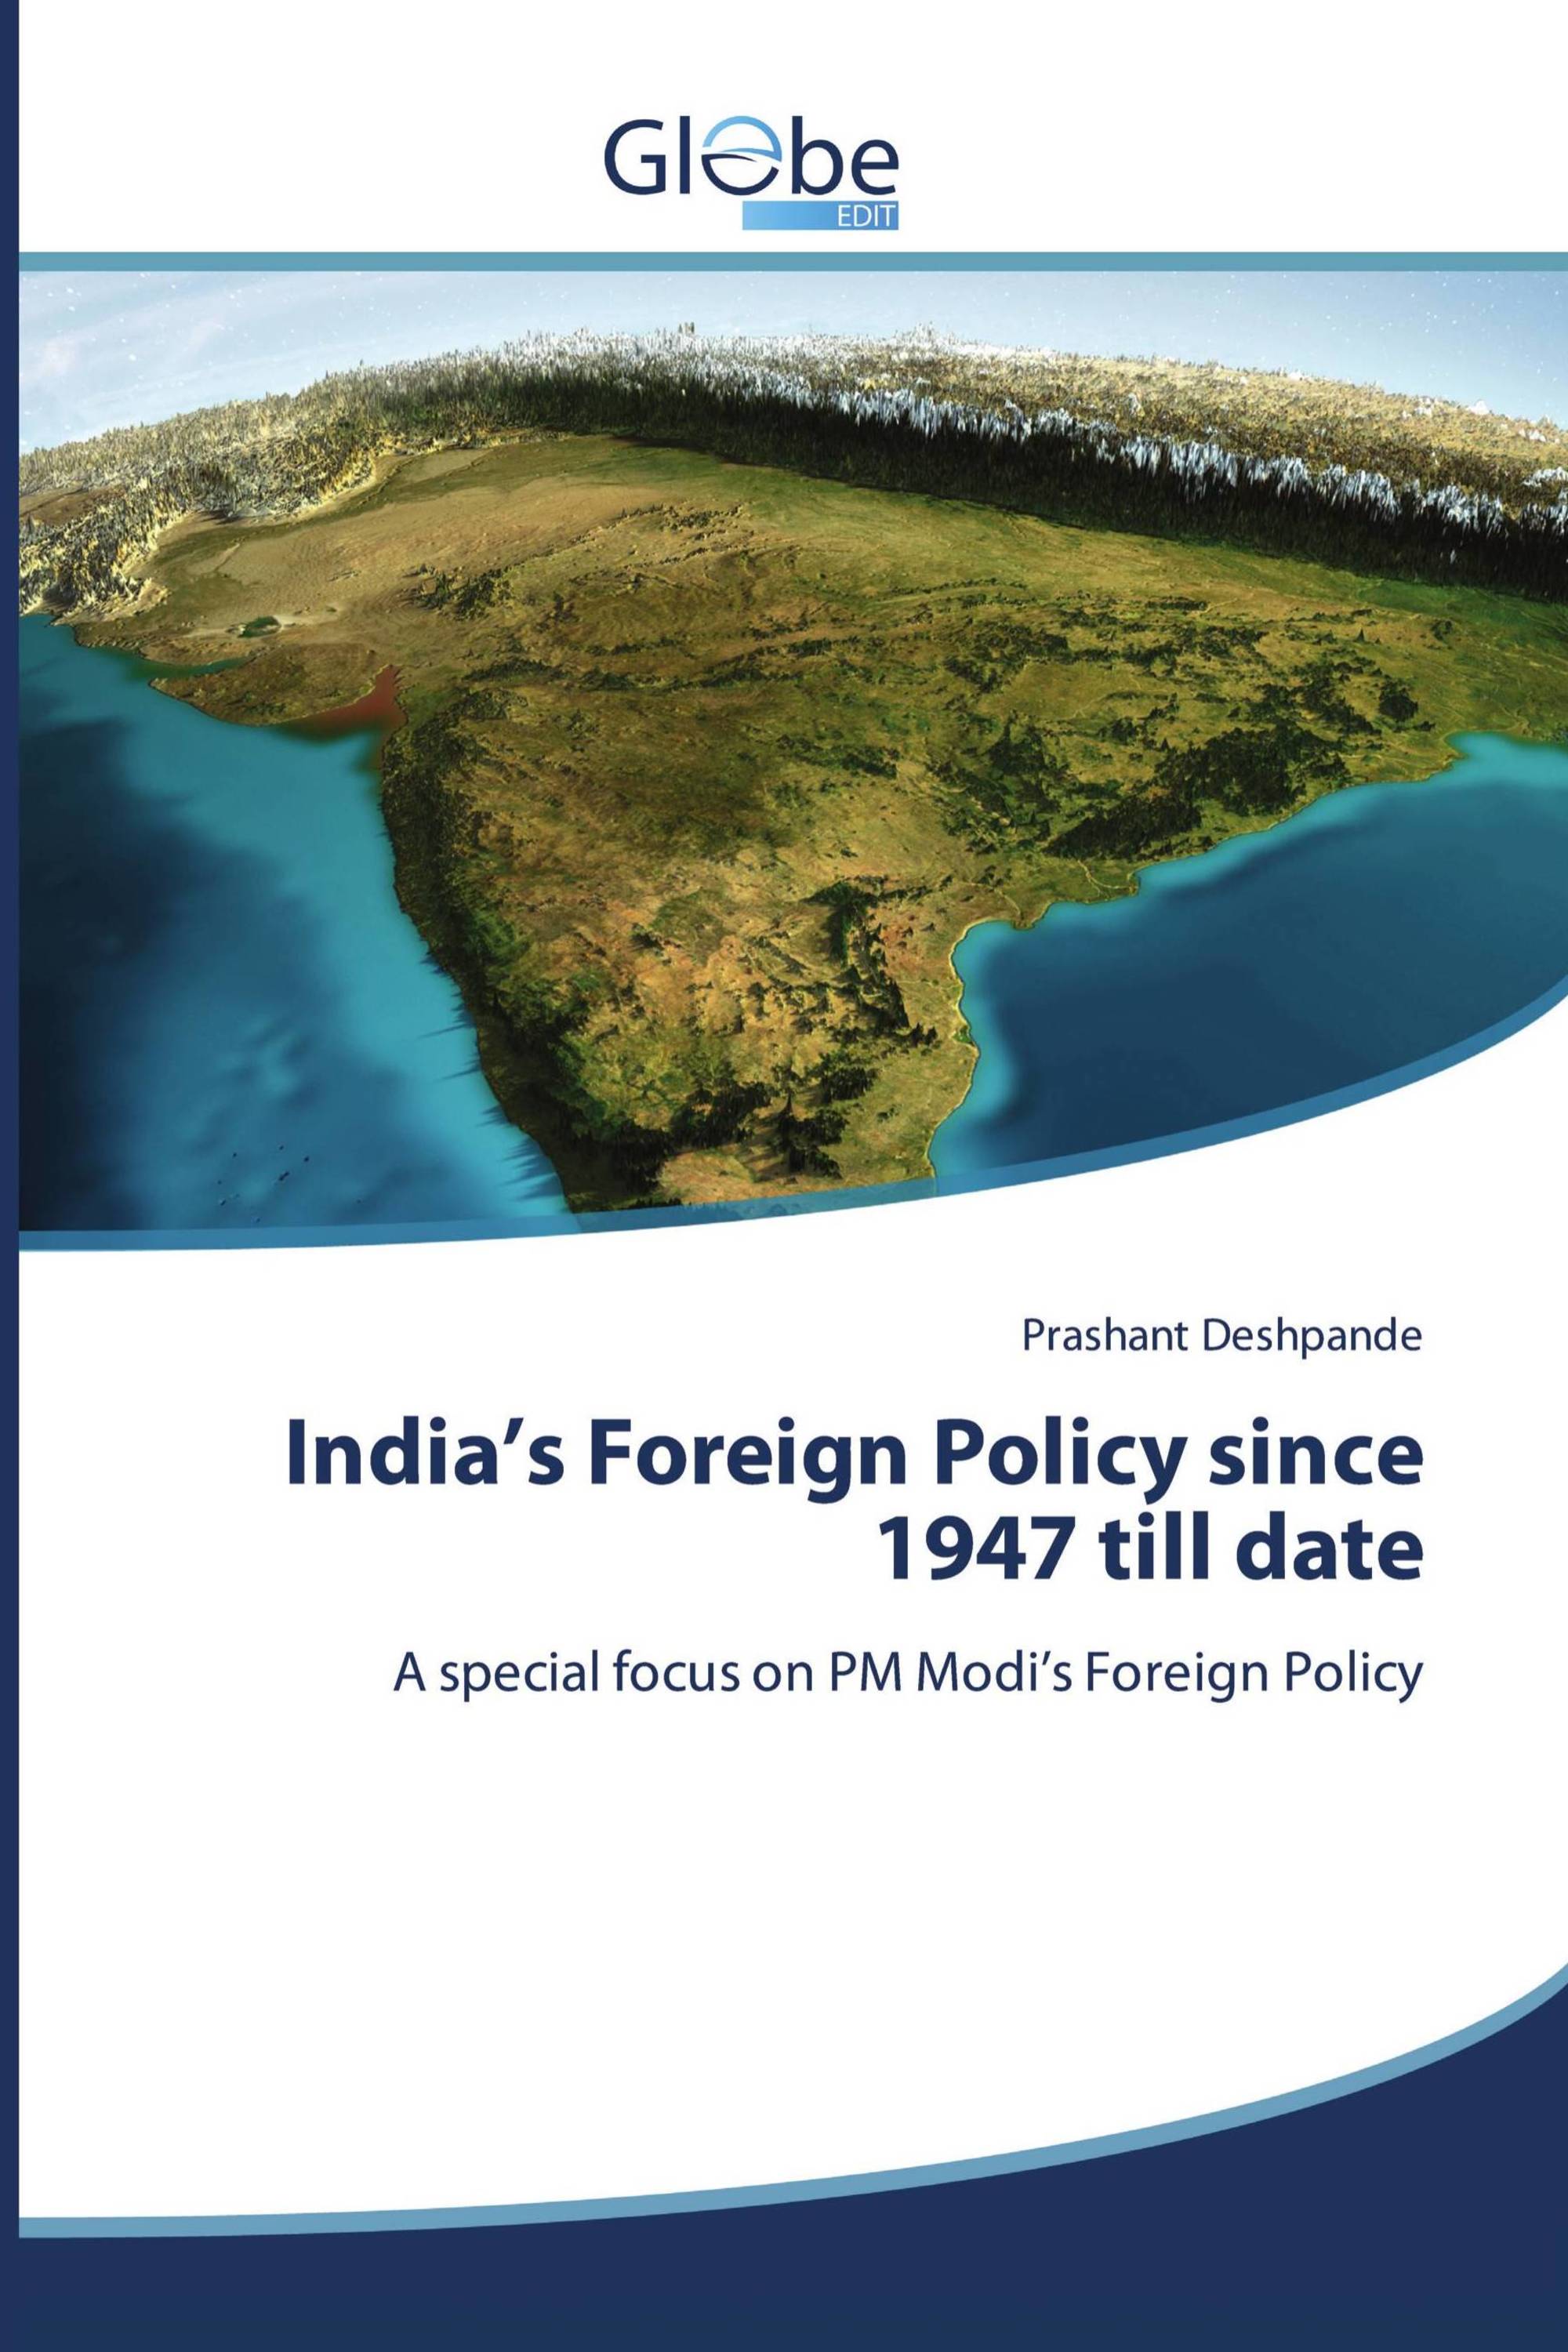 India’s Foreign Policy since 1947 till date